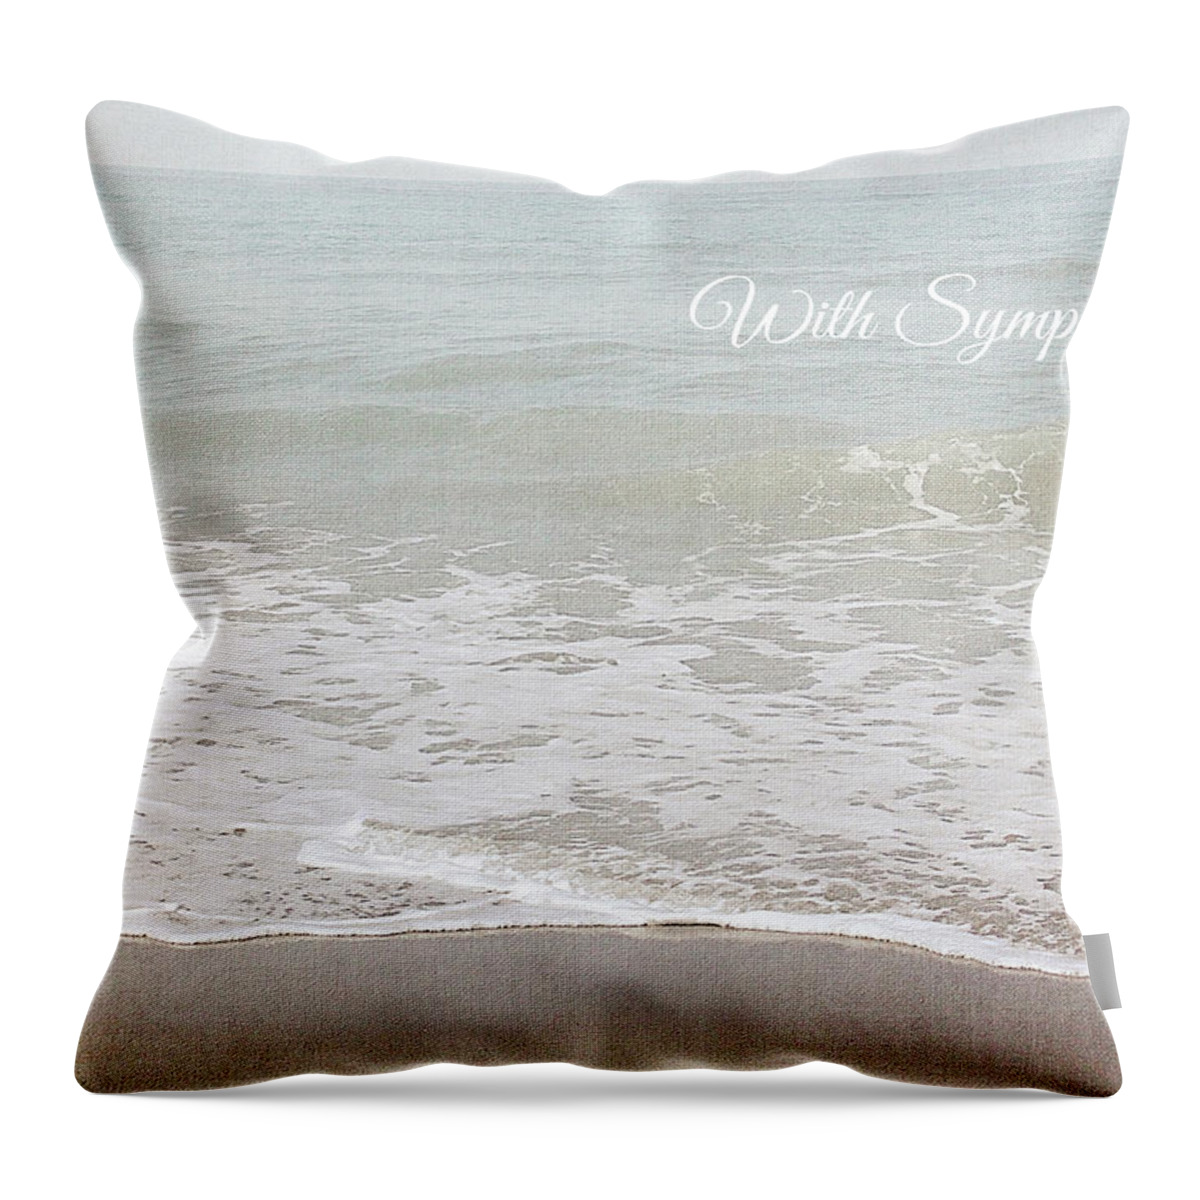 Sympathy Throw Pillow featuring the mixed media Soft Waves Sympathy Card- Art by Linda Woods by Linda Woods